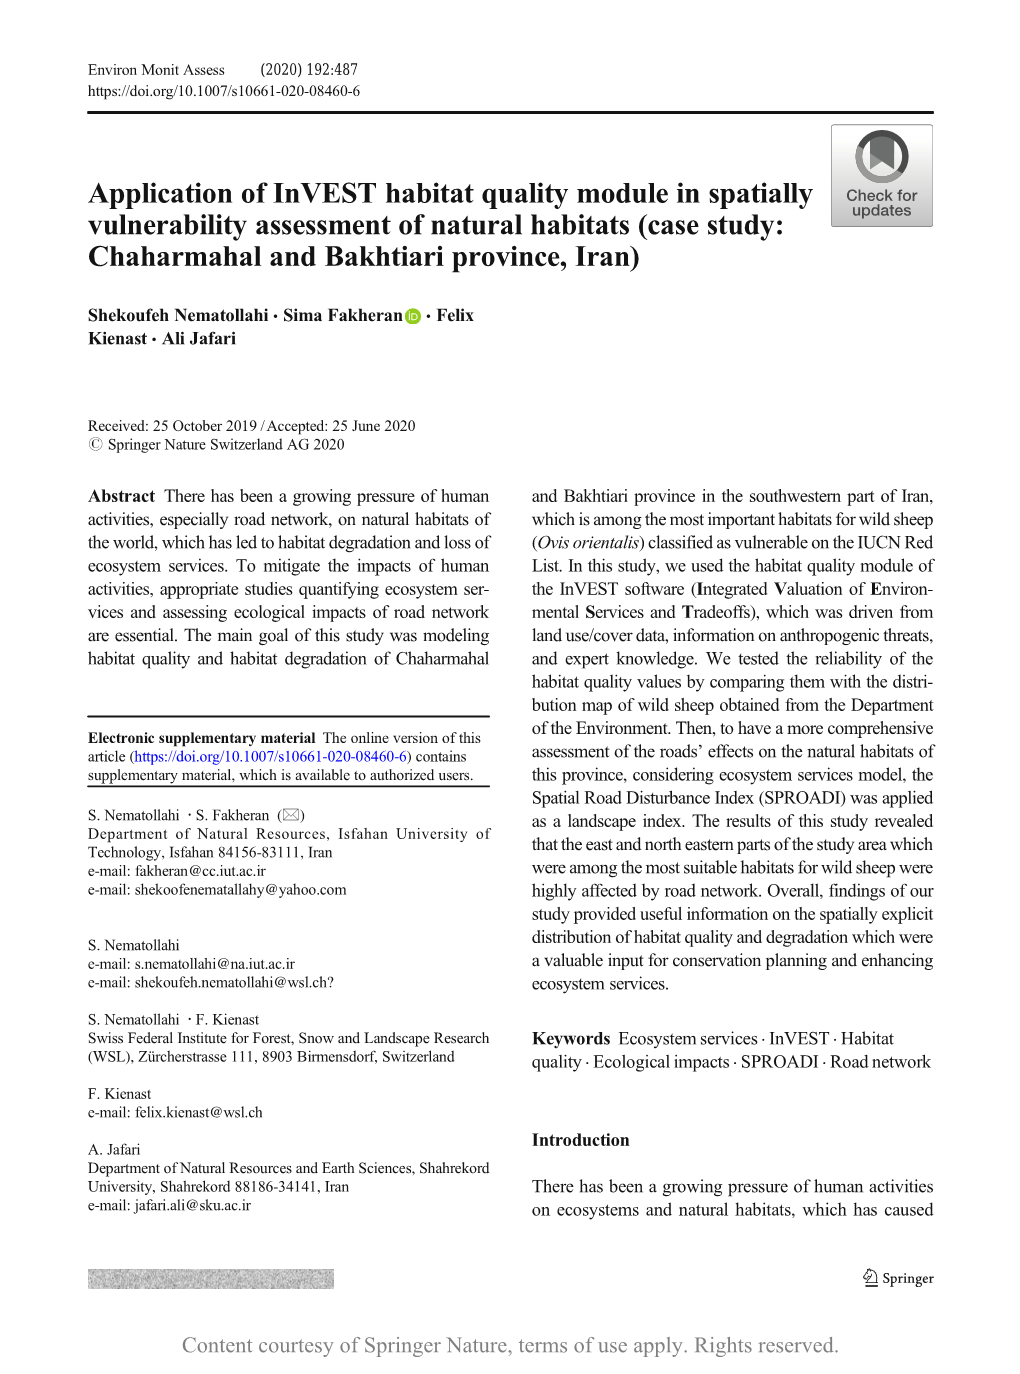 Application of Invest Habitat Quality Module in Spatially Vulnerability Assessment of Natural Habitats (Case Study: Chaharmahal and Bakhtiari Province, Iran)